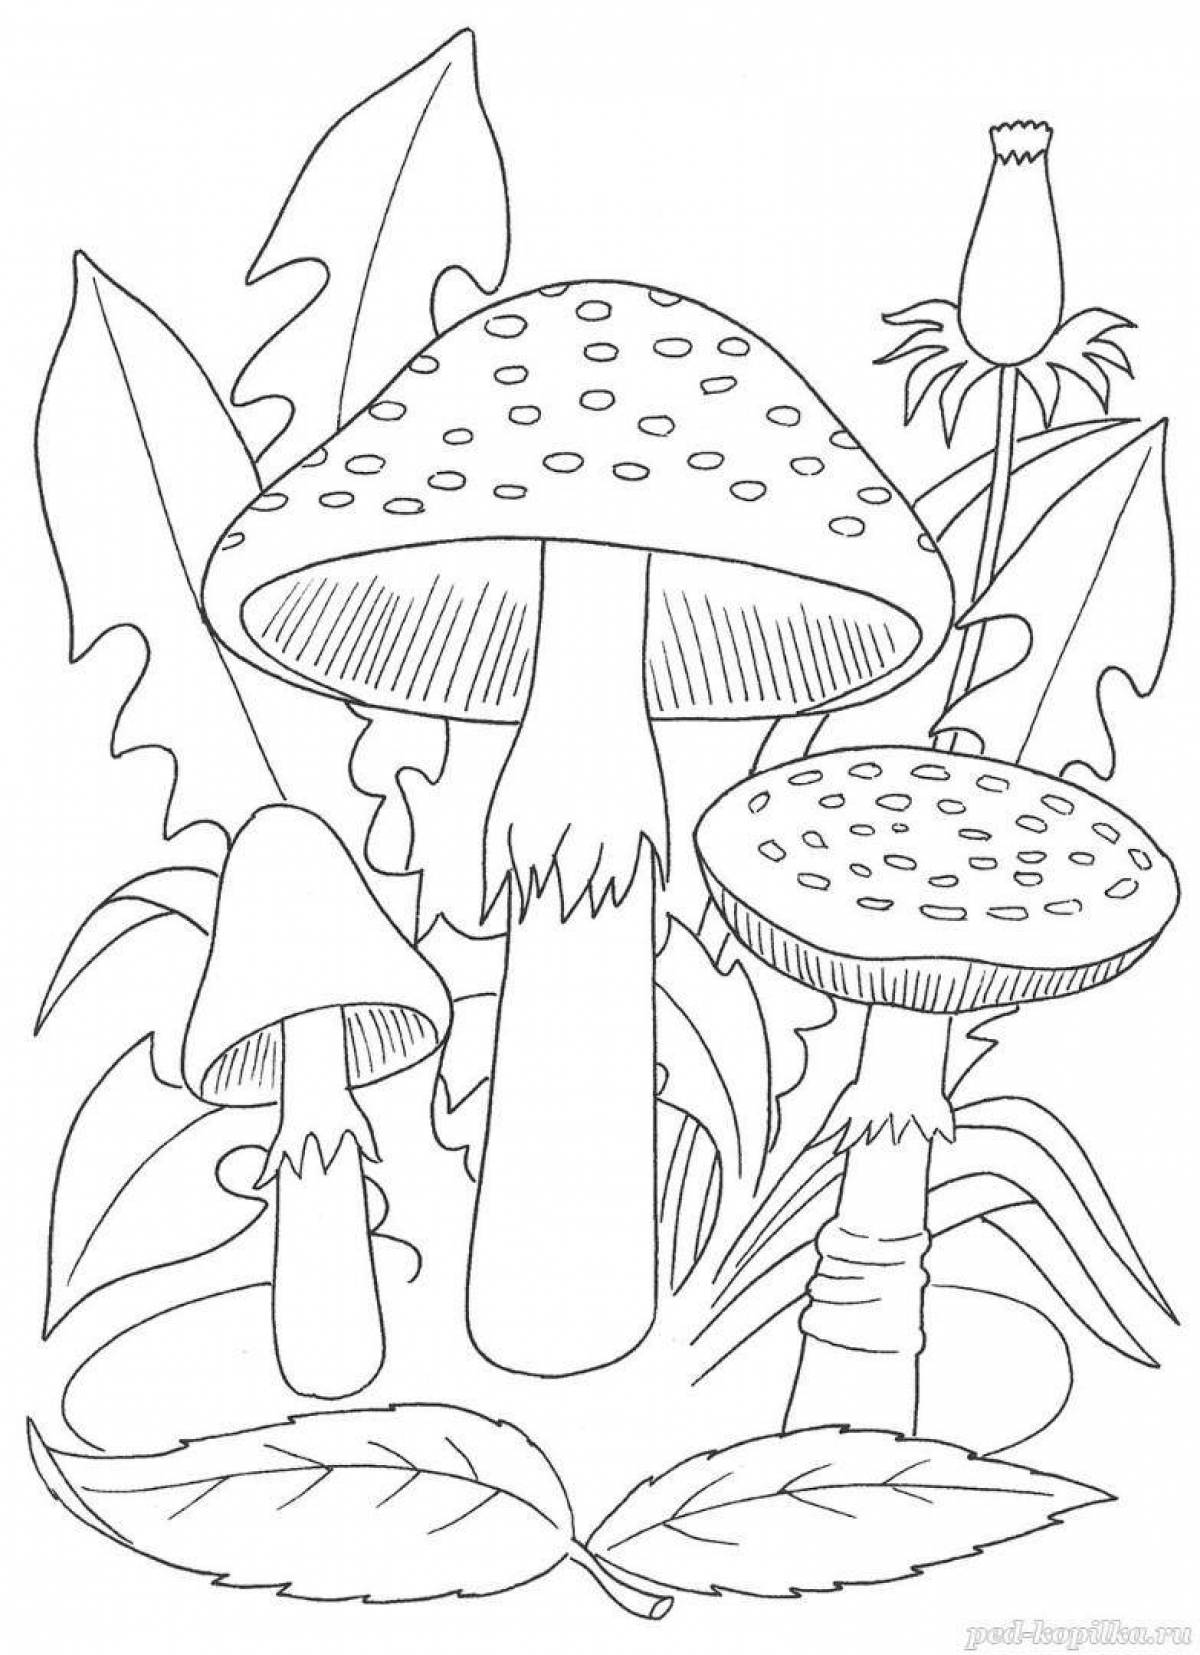 Great mushroom coloring book for 3-4 year olds